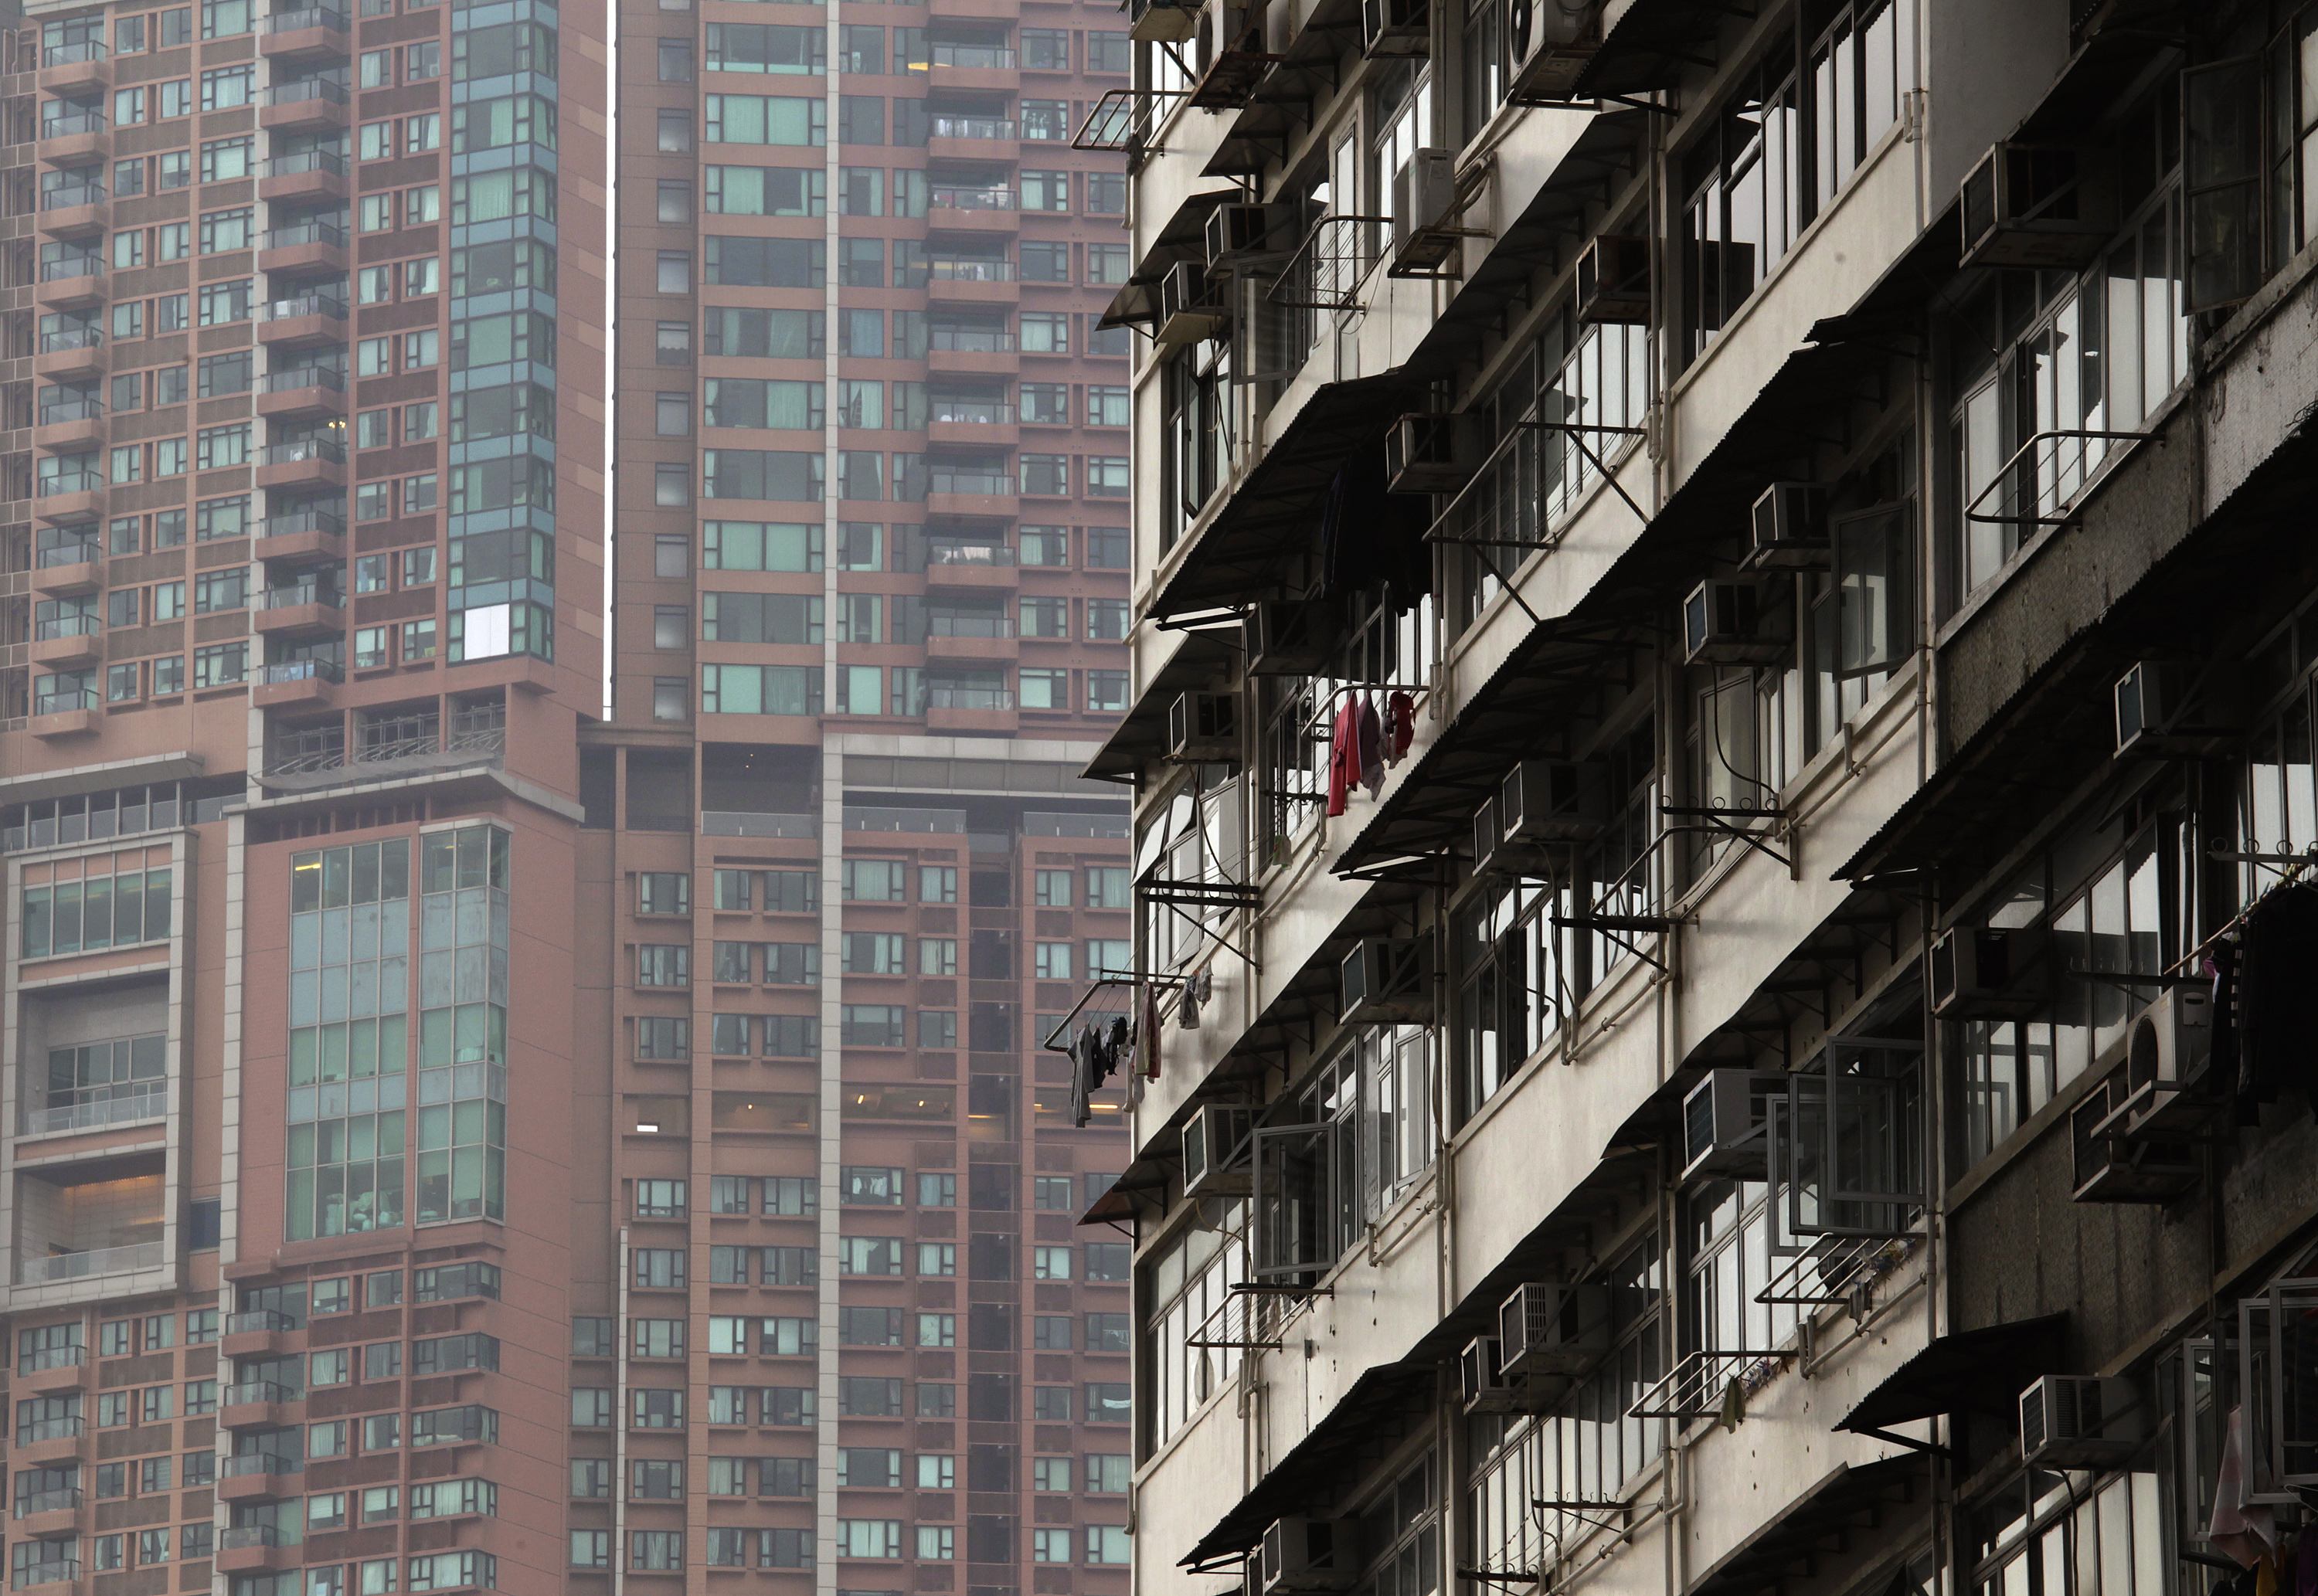 An old residential building is seen in front of The Arch, a luxury high rise apartment, at Hong Kong's West Kowloon district January 15, 2013. Singapore and Hong Kong now have identical 15 percent levies to slow the foreign money that has added fuel to their overheated property markets - measures that will help first-time buyers but throw the spotlight on investors' next targets. The curbs on residential real estate purchases could shift demand to retail and industrial spaces, diverting billions of dollars to those sectors as well as to housing markets in the United States, Canada, Australia and Malaysia. Picture taken January 15, 2013. REUTERS/Bobby Yip (CHINA - Tags: REAL ESTATE BUSINESS)